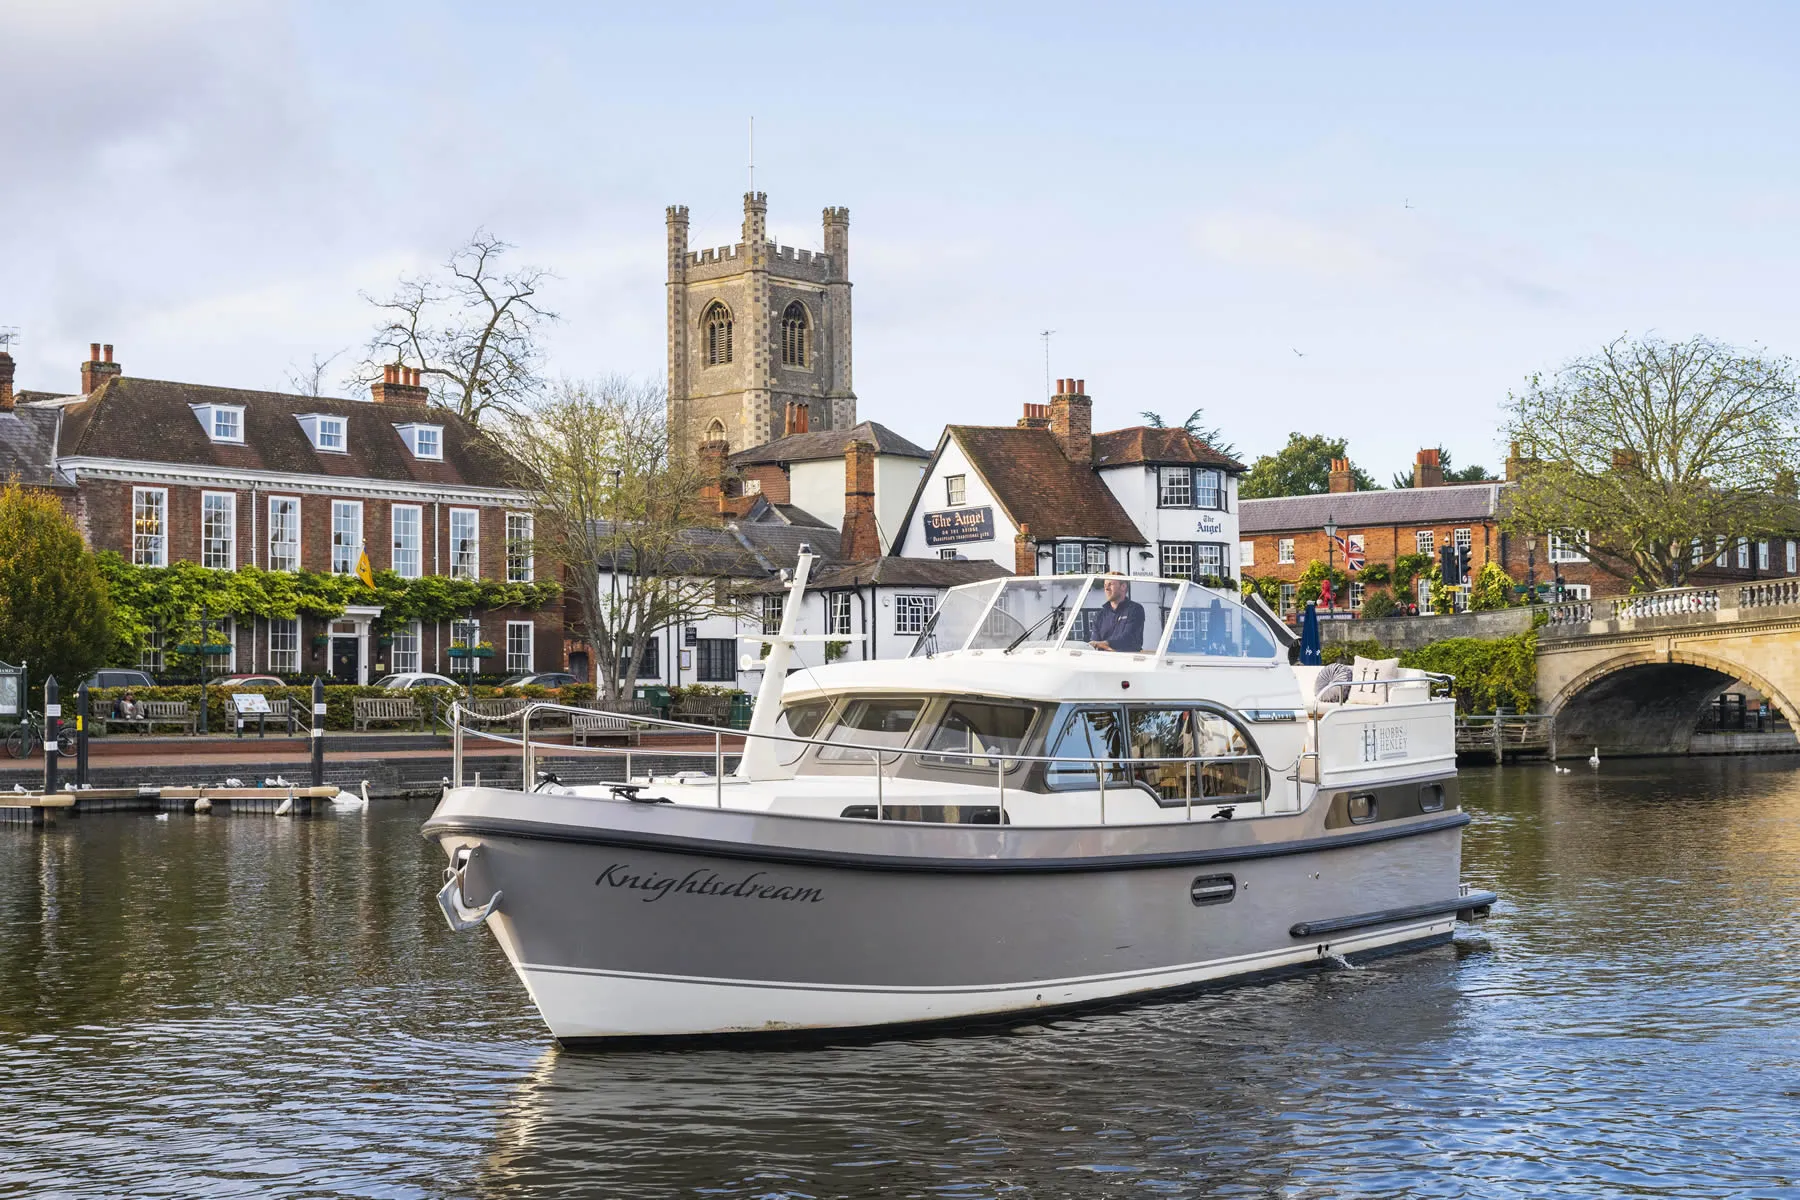 Hobbs of Henley boat Knightsdream being skippered by team member Lewis cruising along the river thames passing the famous pub 'The Angel' on the bridge